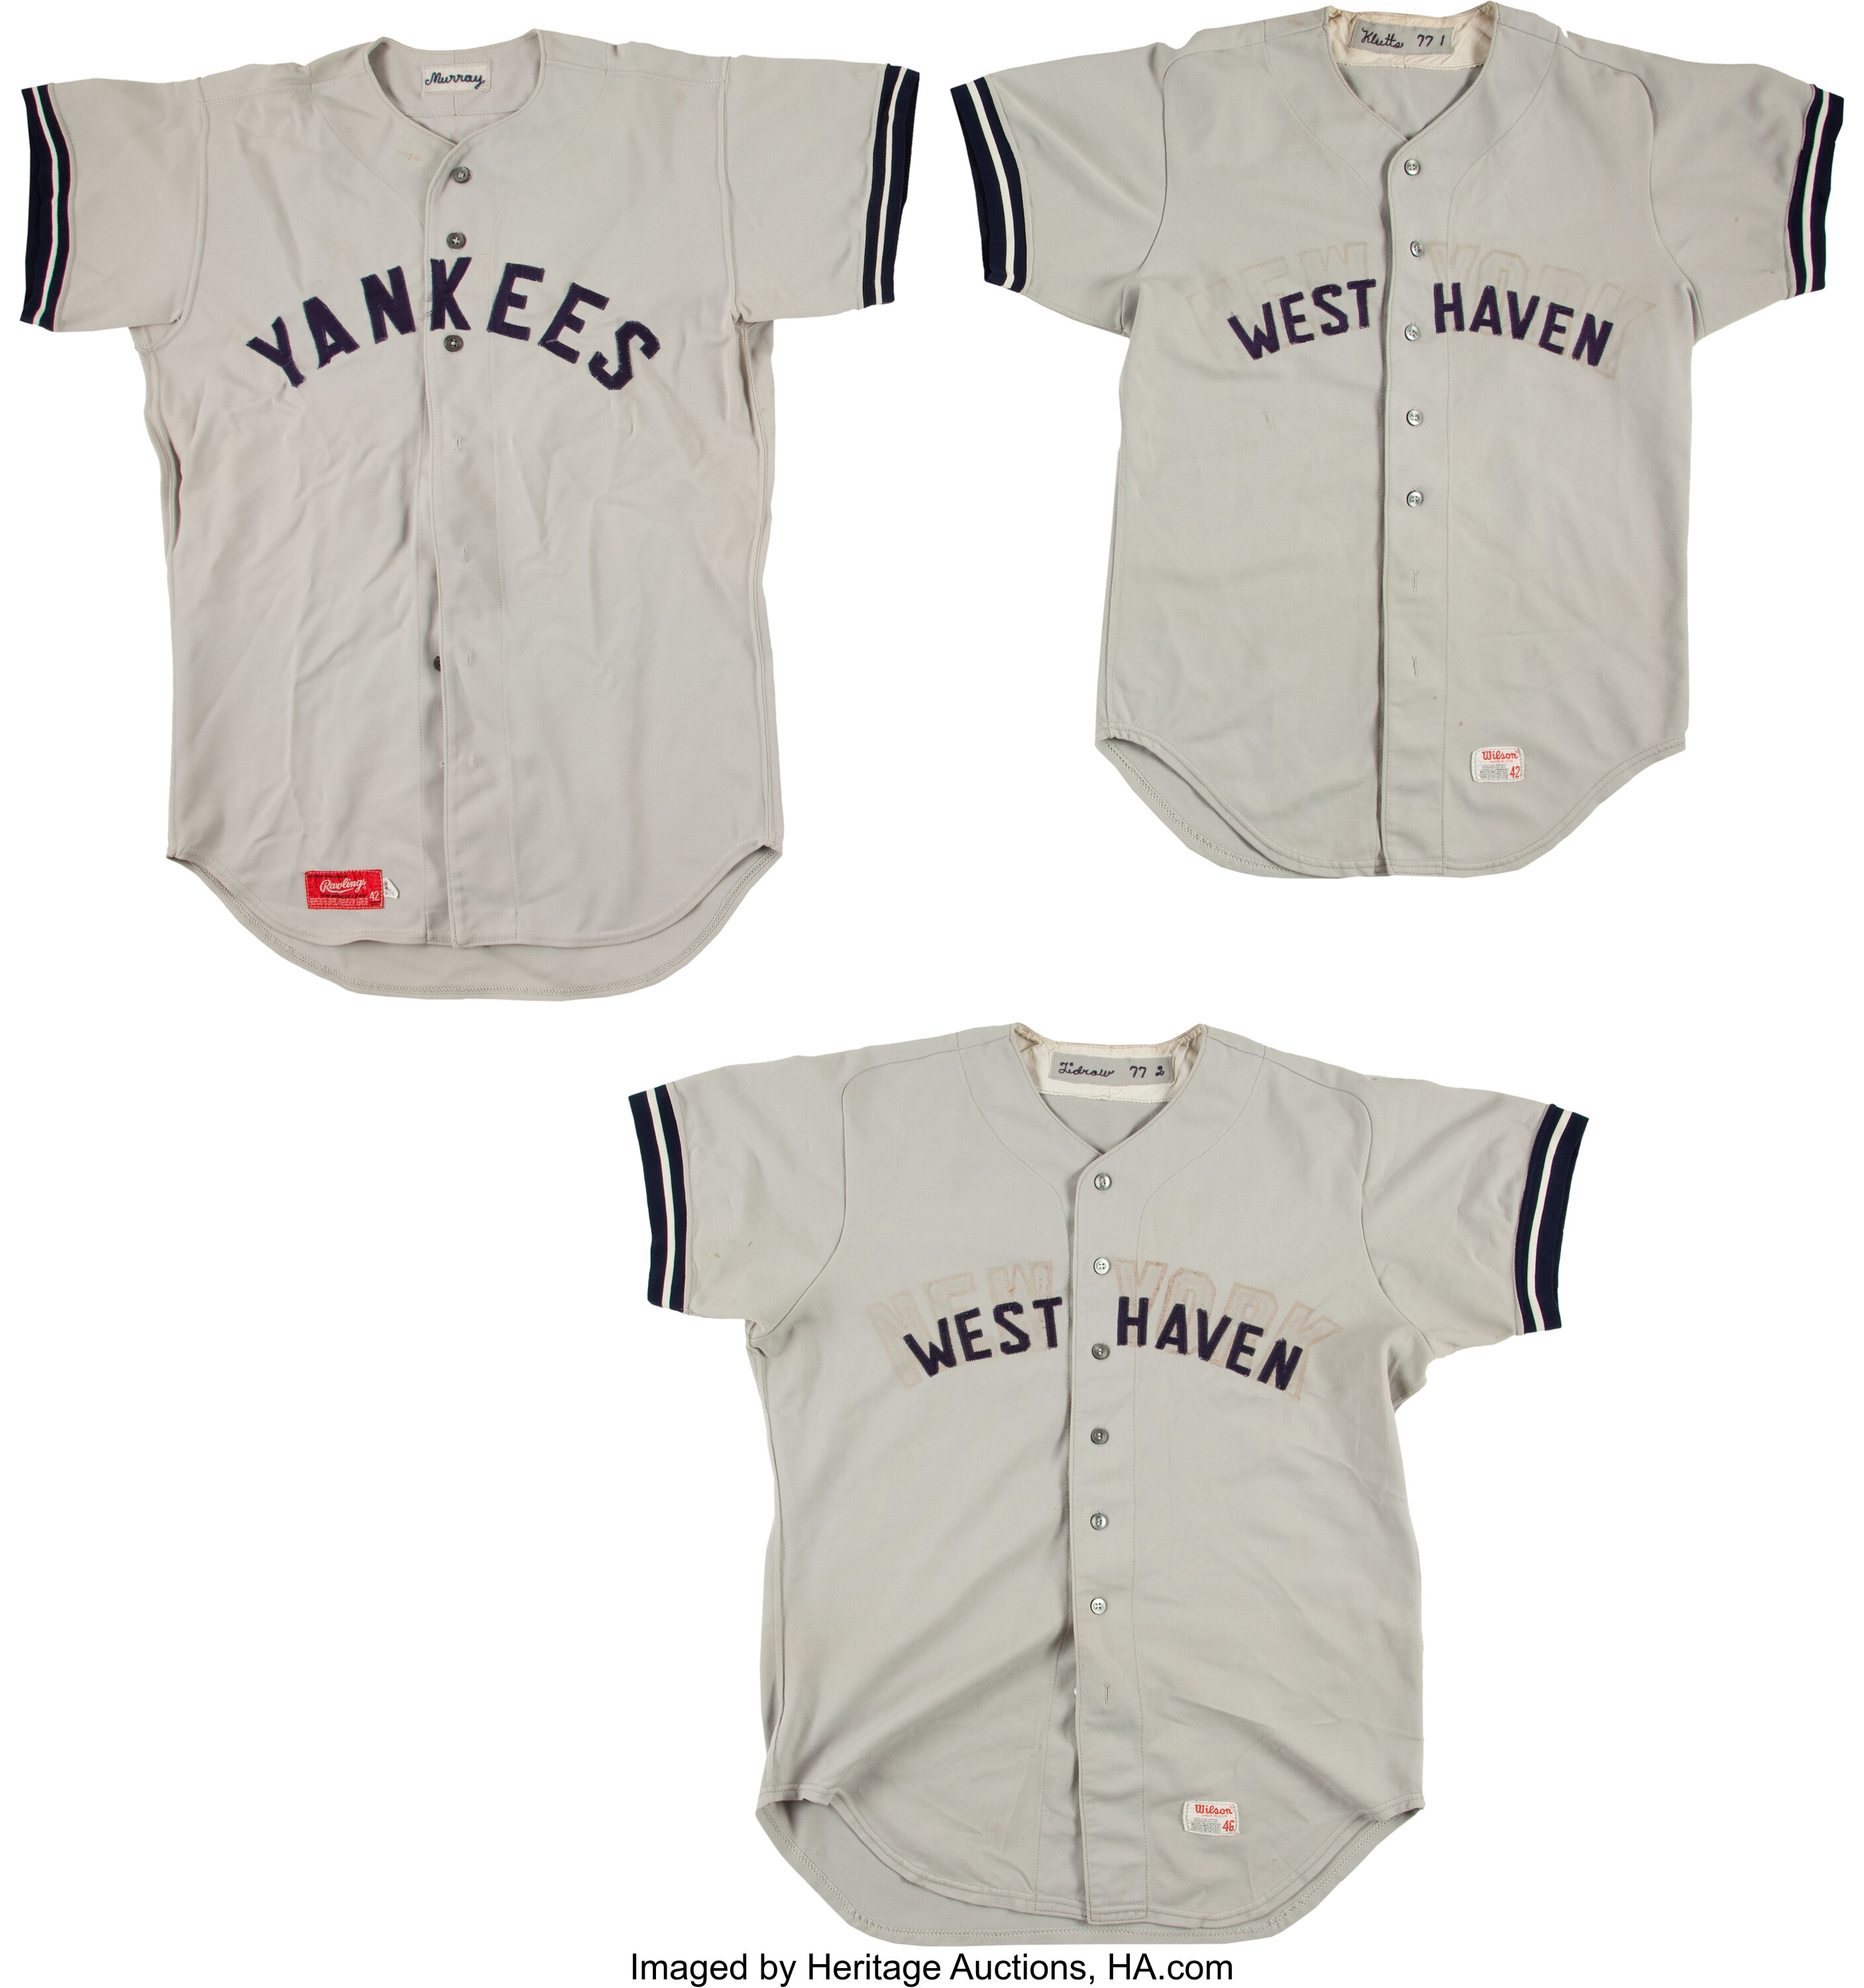 New York Yankees Game Worn Jersey and Pants Collection - All